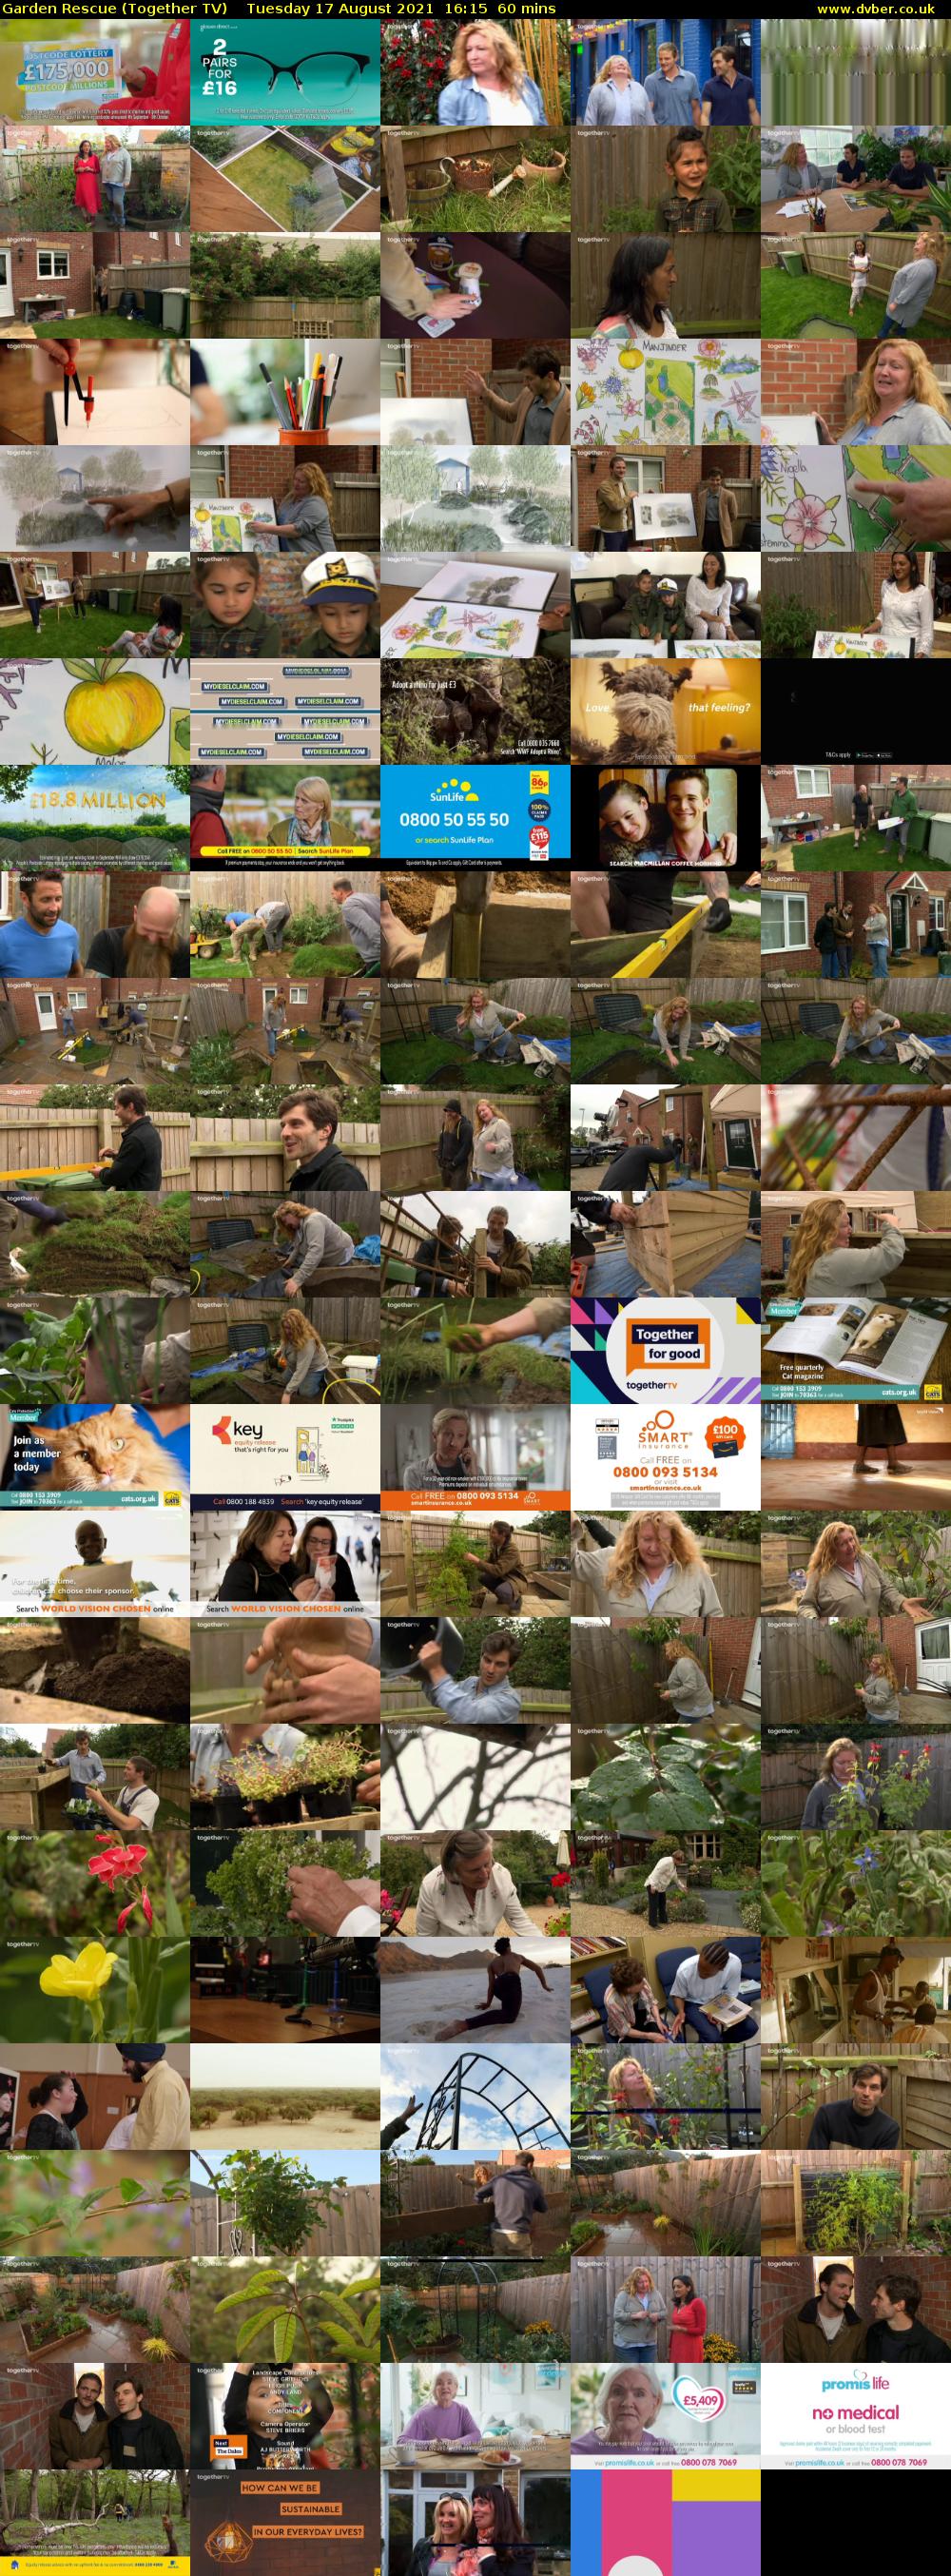 Garden Rescue (Together TV) Tuesday 17 August 2021 16:15 - 17:15